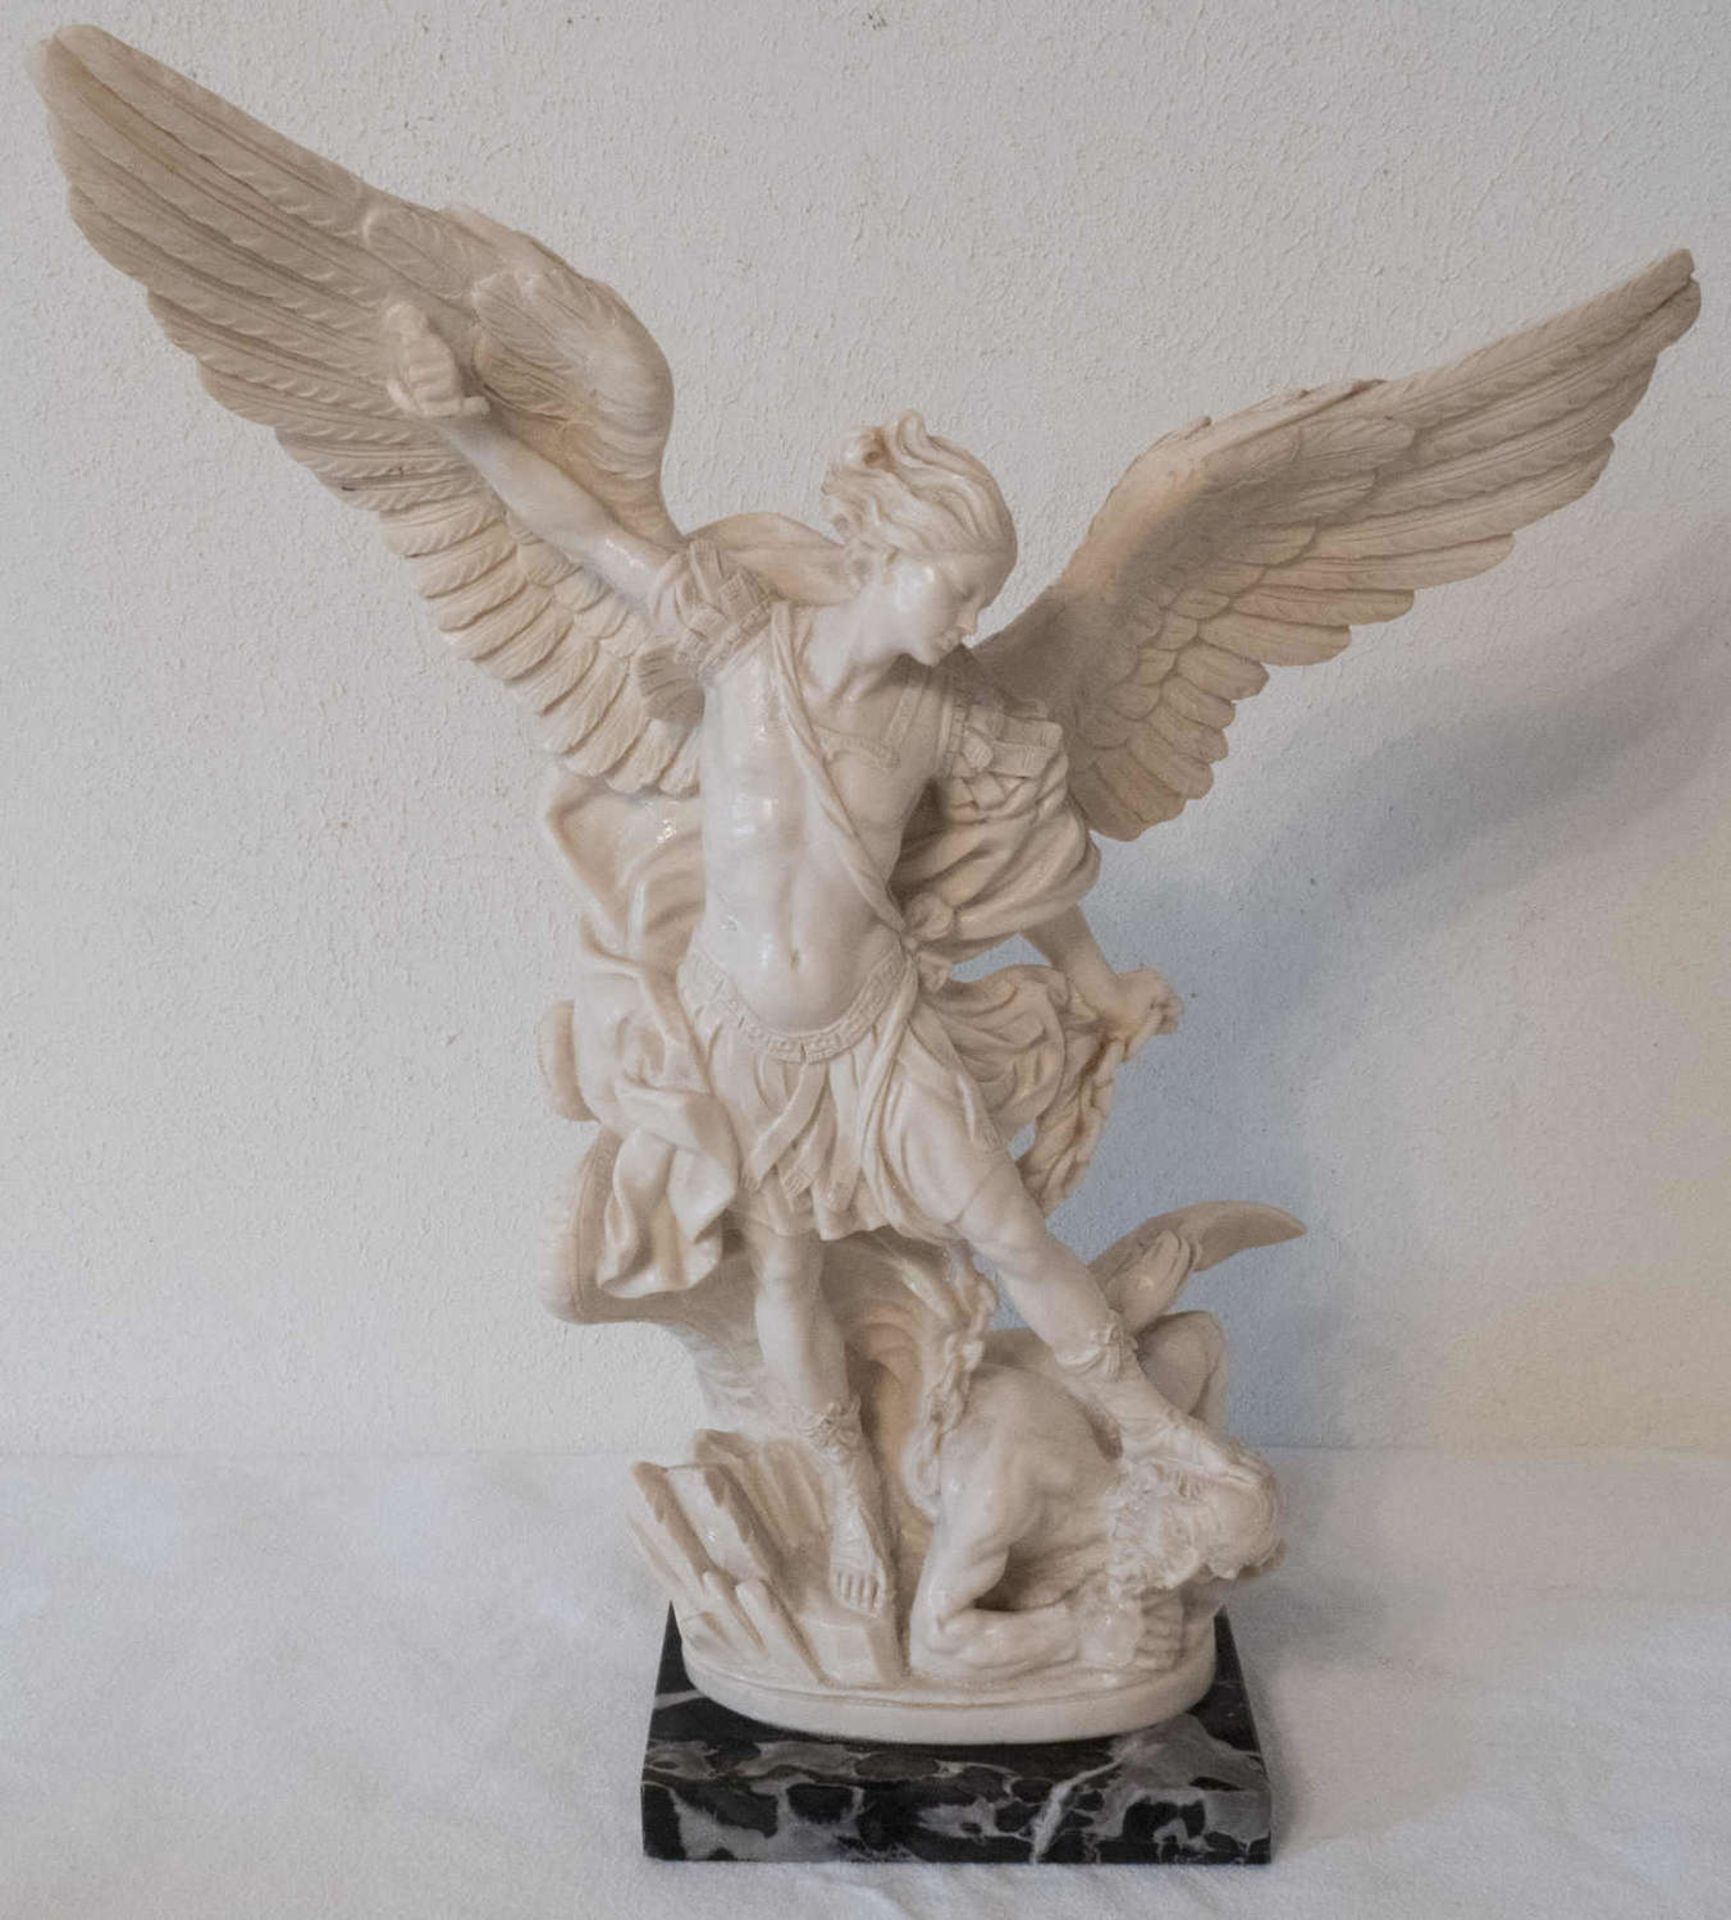 Sacral figure, Archangel Michael over fallen angel "hell fall". On marble base. Height: about 40 cm.